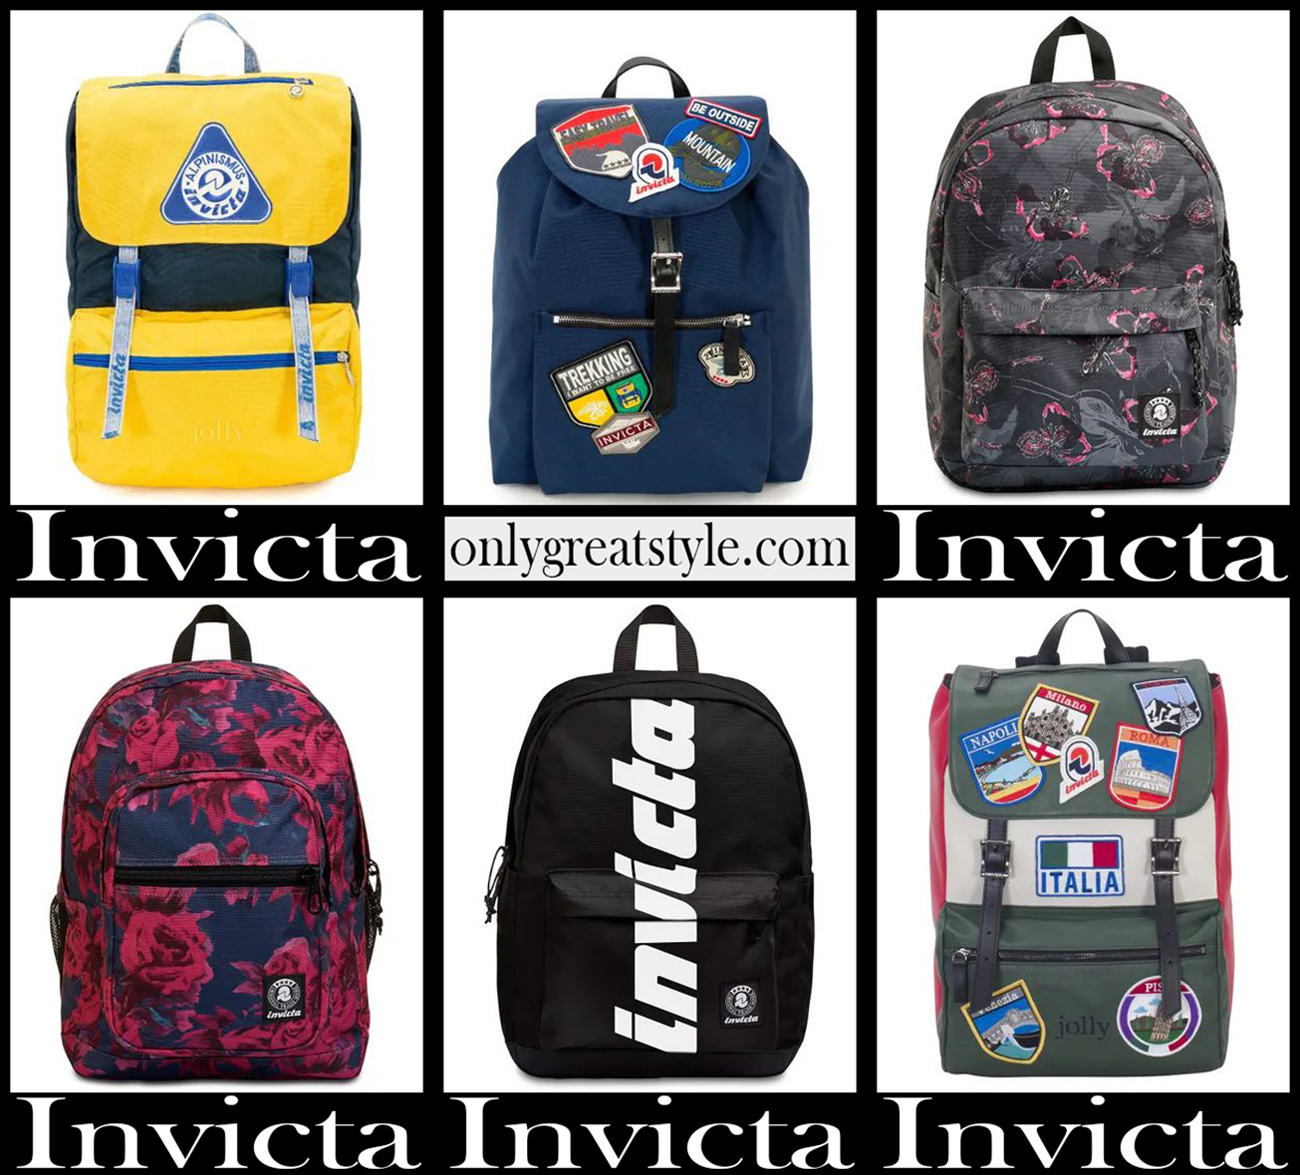 Invicta backpacks 2021 2022 new arrivals school free time